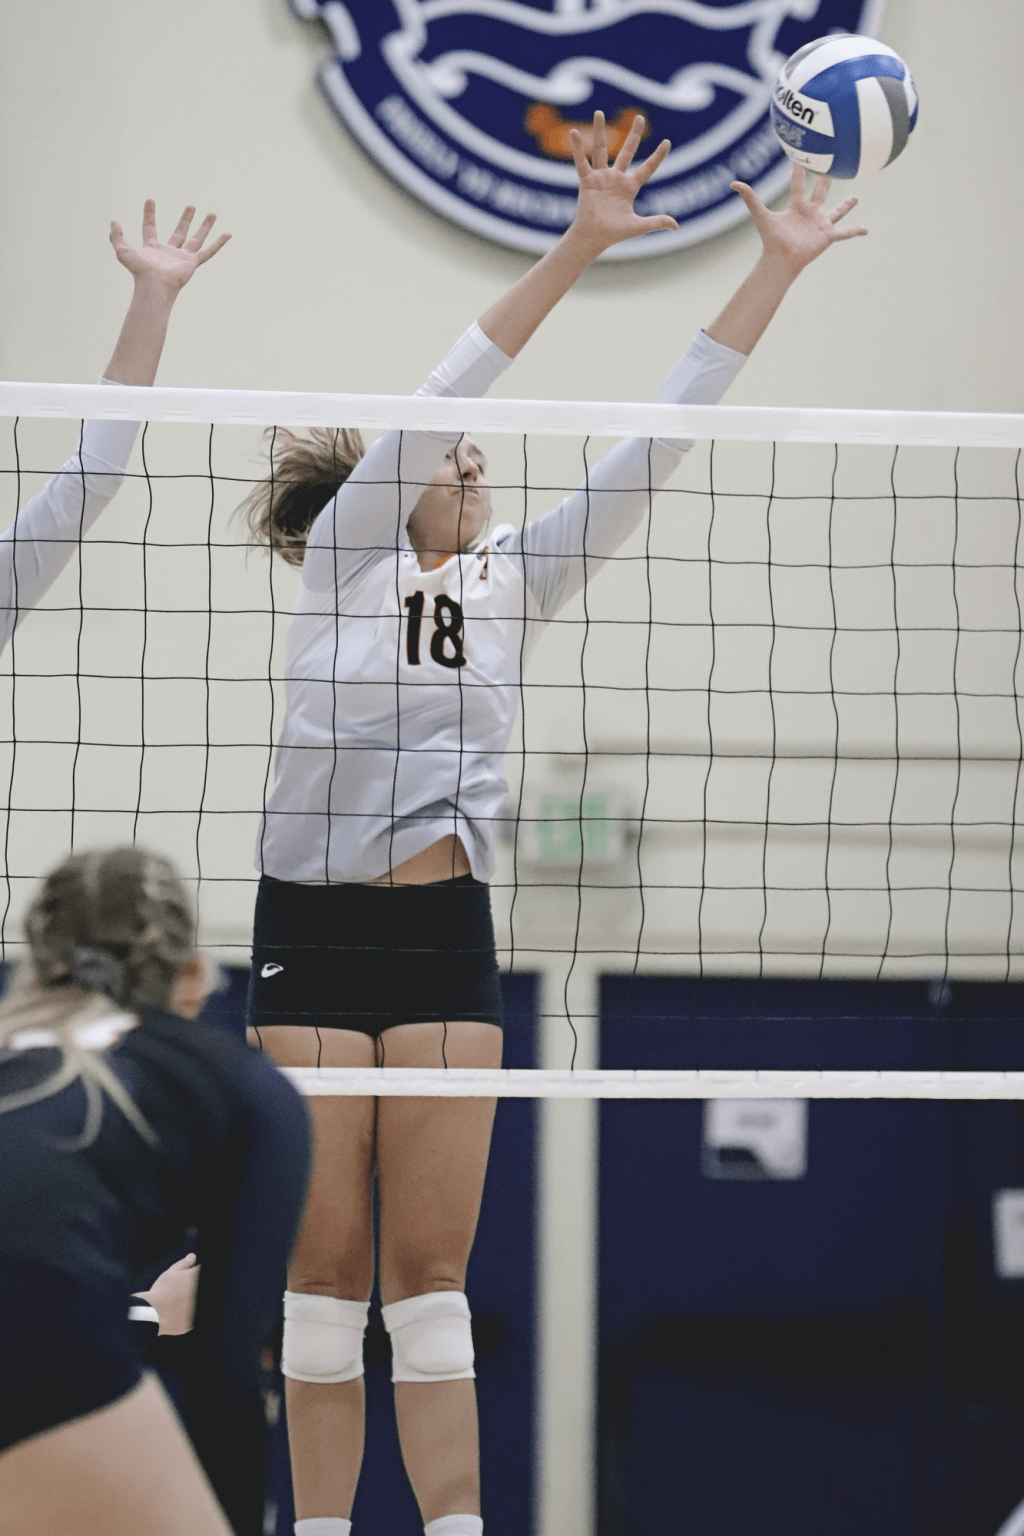 Junior outside hitter Rachel Ahrens extends for a block in Friday's match. Ahrens earned the WCC Offensive Player of the Week honor for the second straight week.